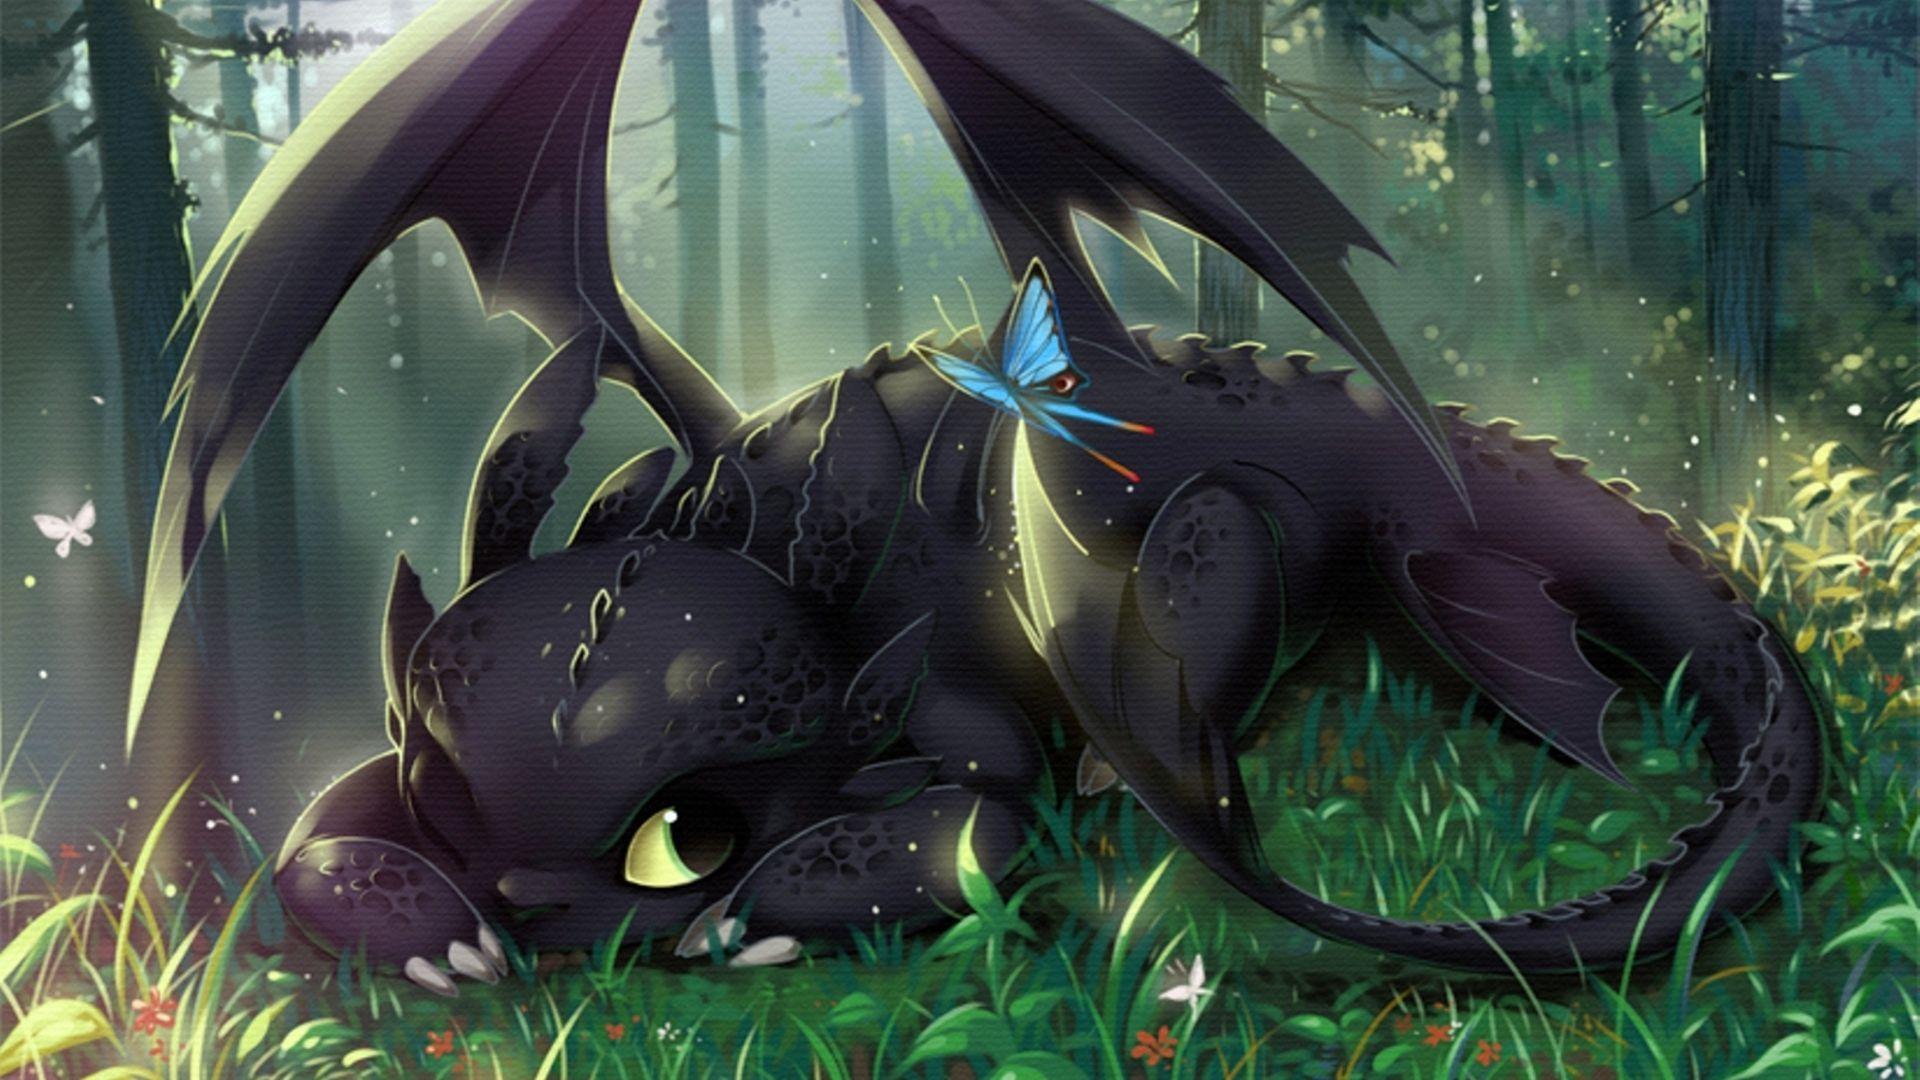 Ohnezahn. Wallpaper. Toothless, Dragons and Httyd